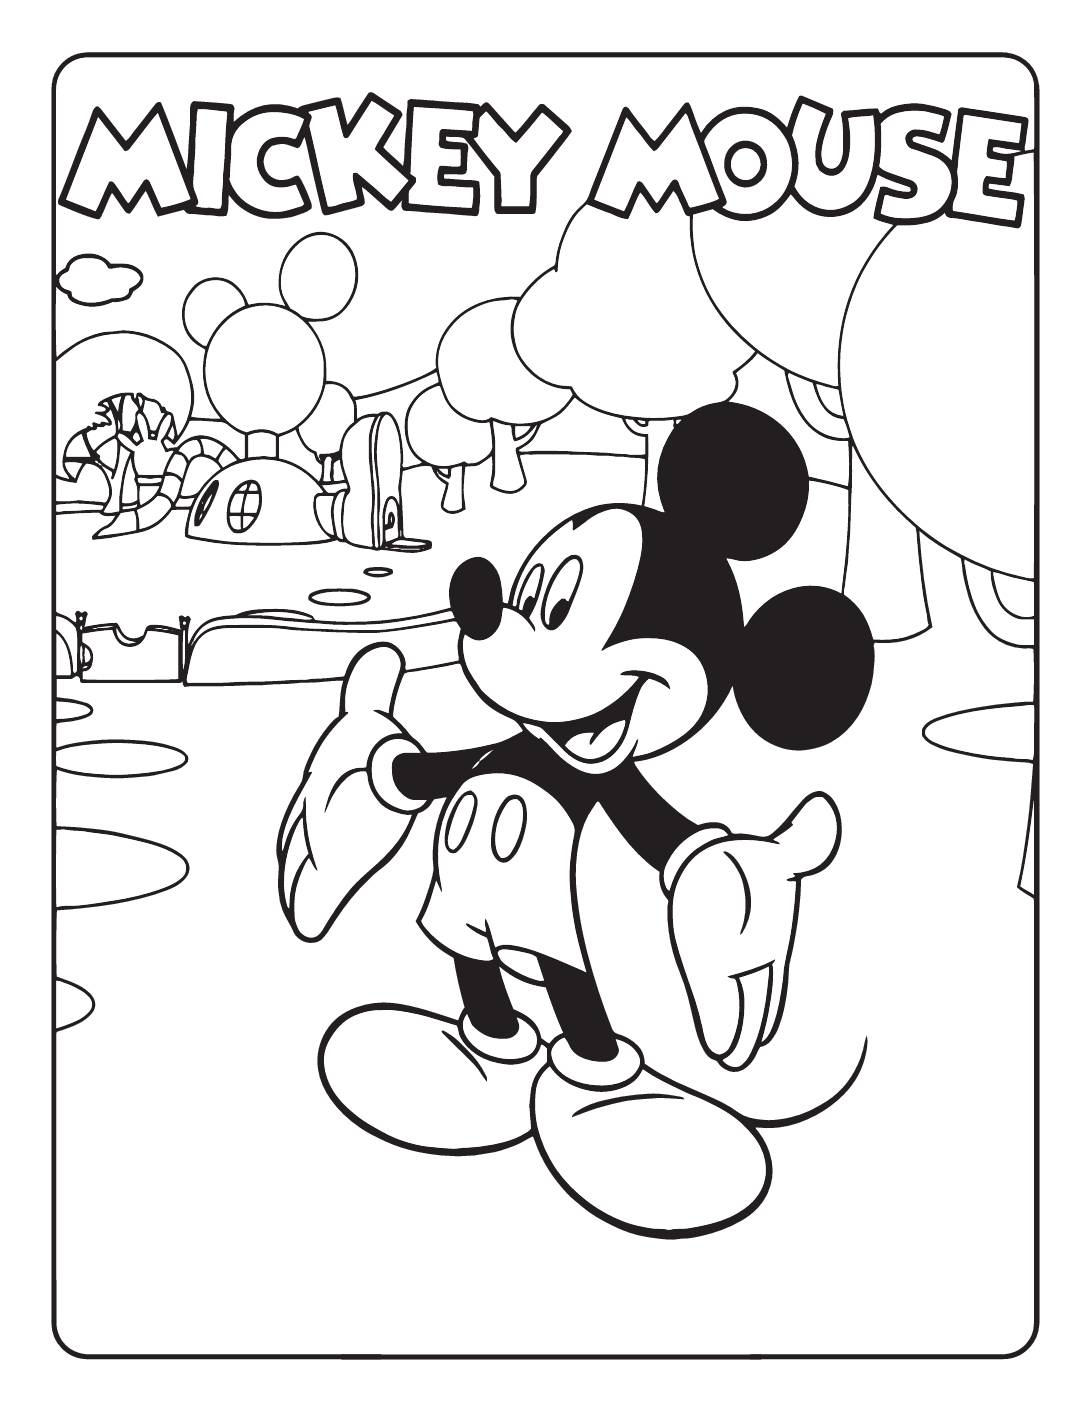 Mickey Mouse Coloring Page7